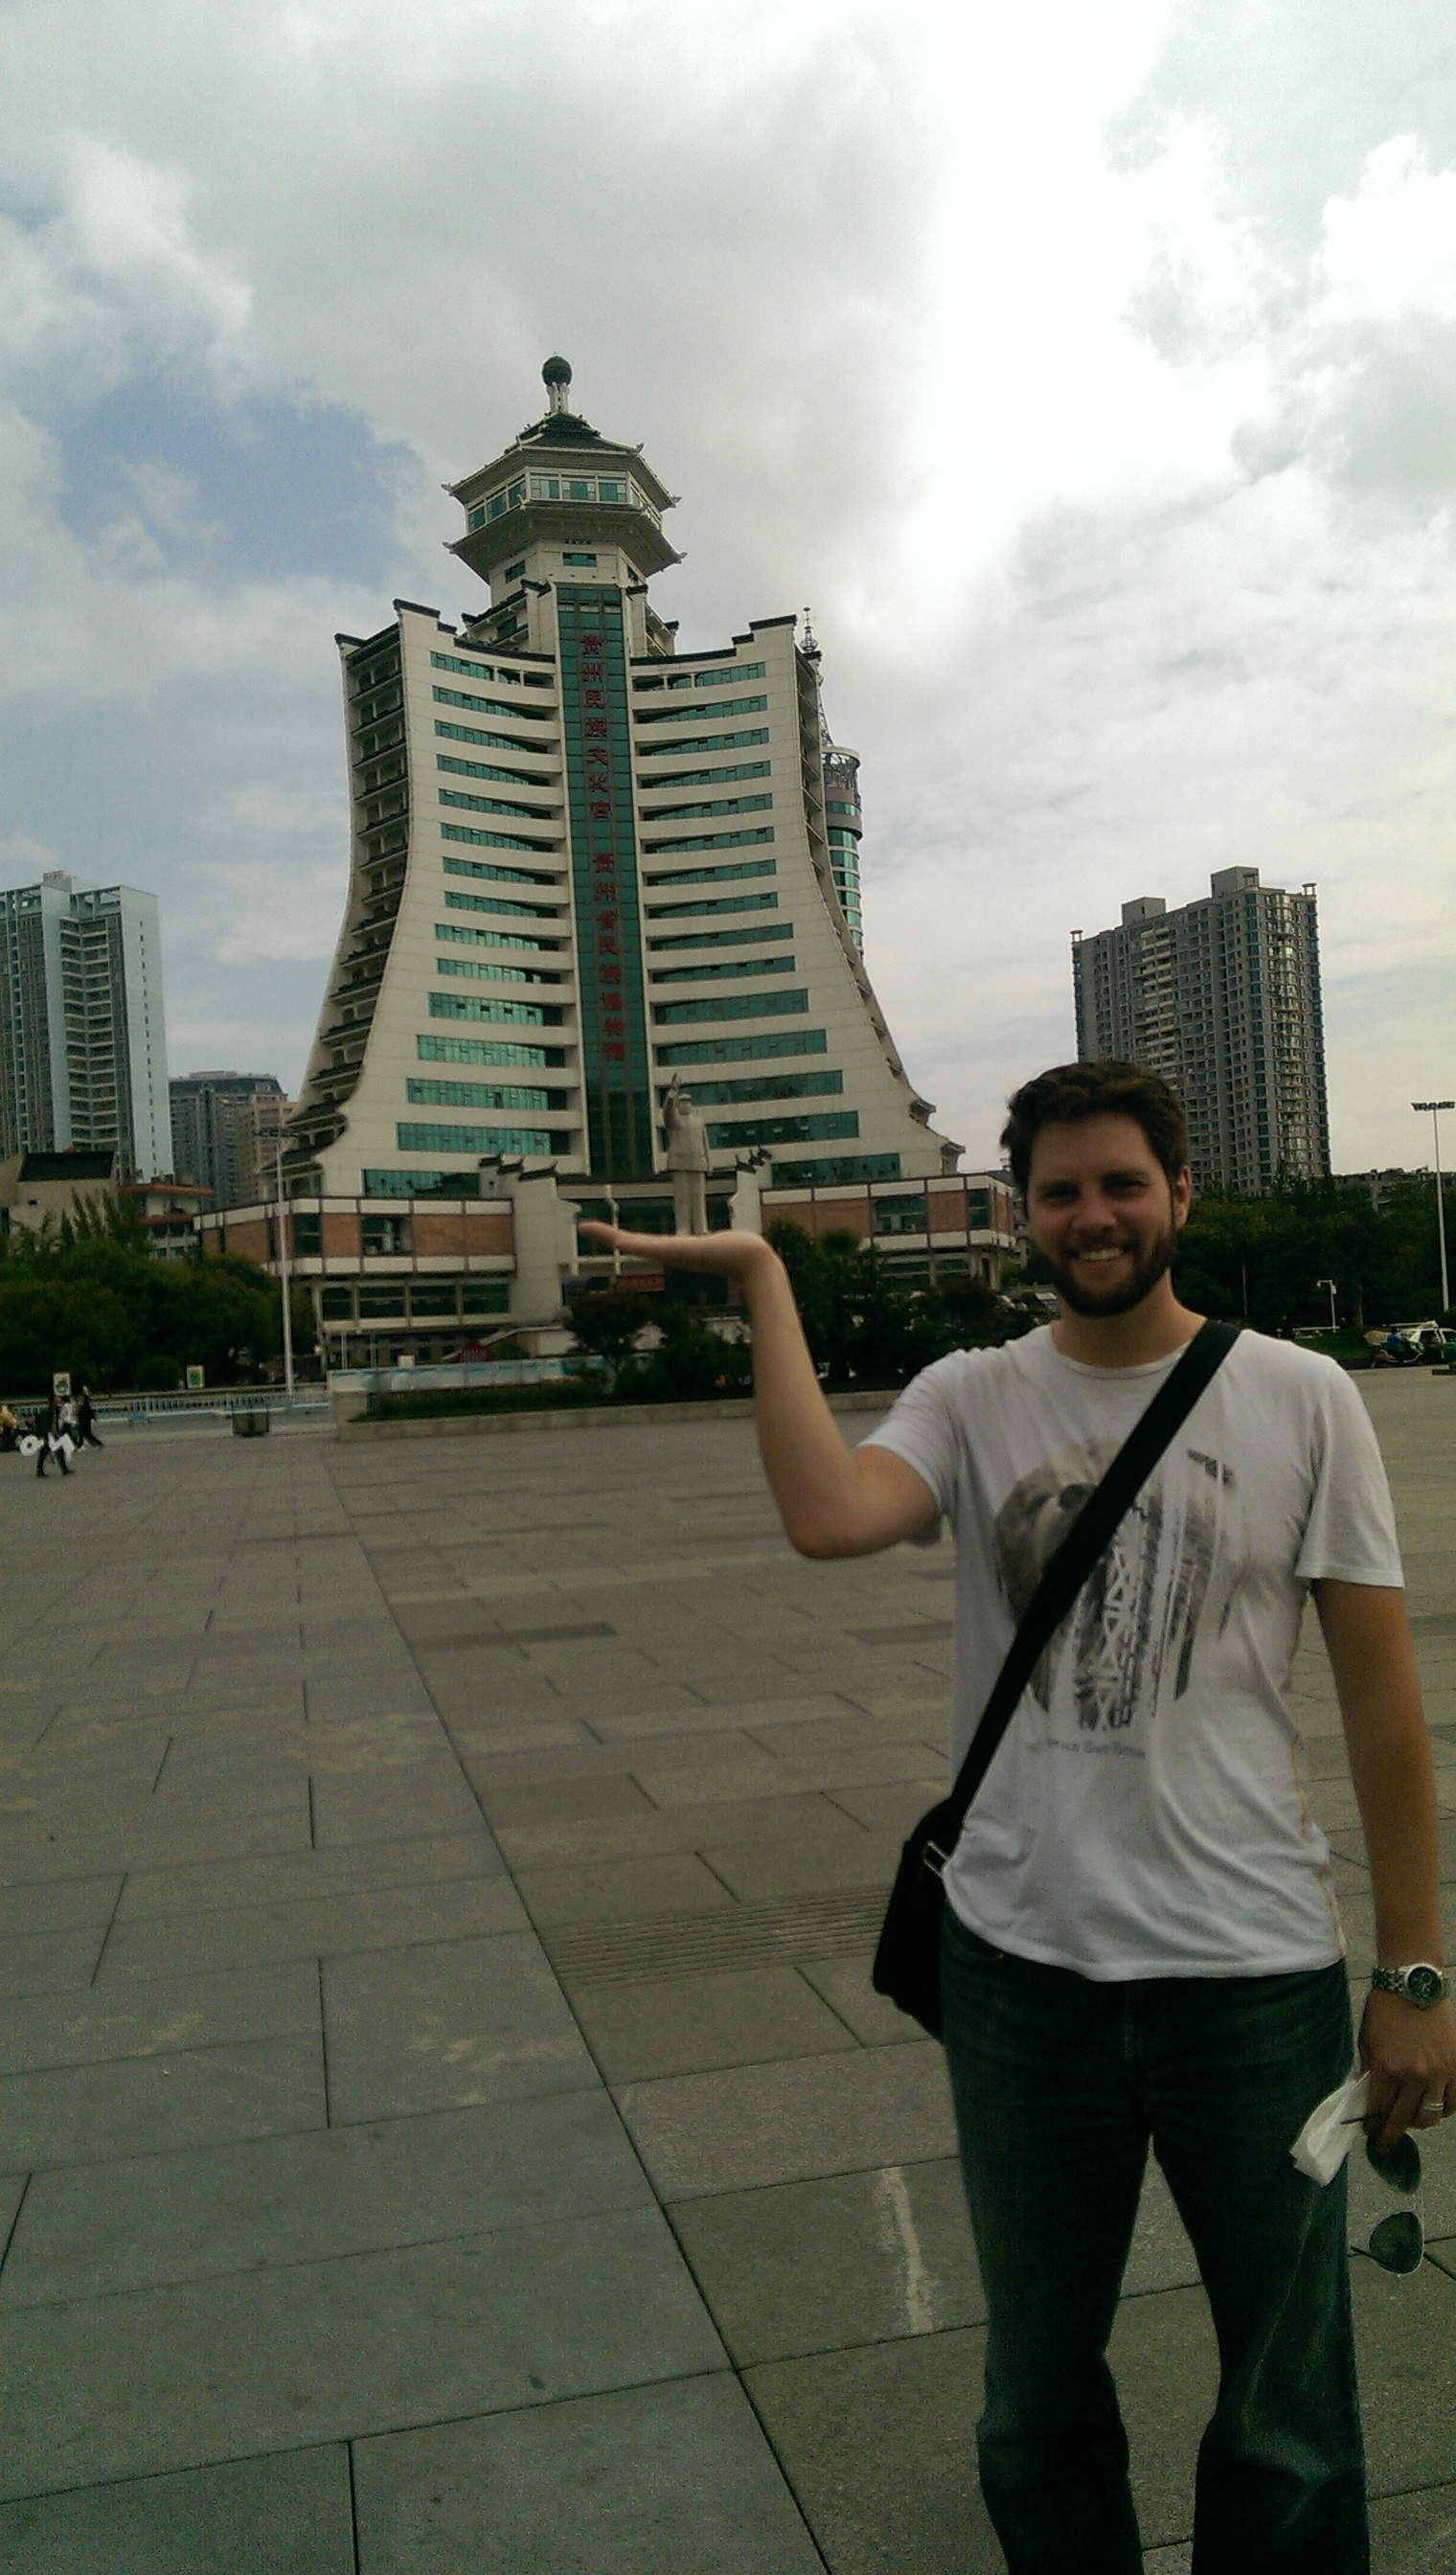 This is Dave, happily holding up a statue of Chairman Mao.